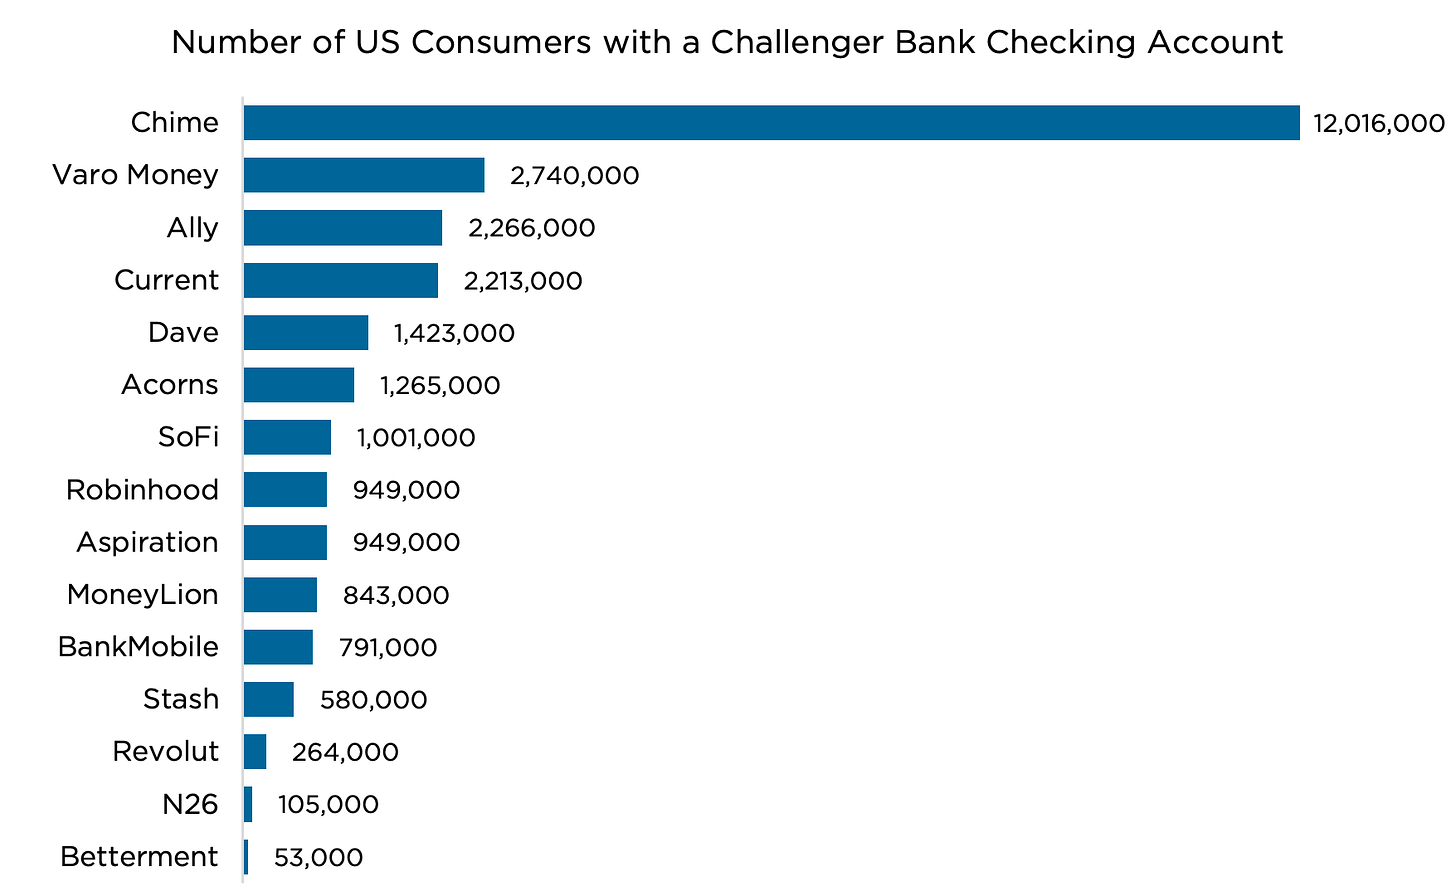 Number of challenger bank customers